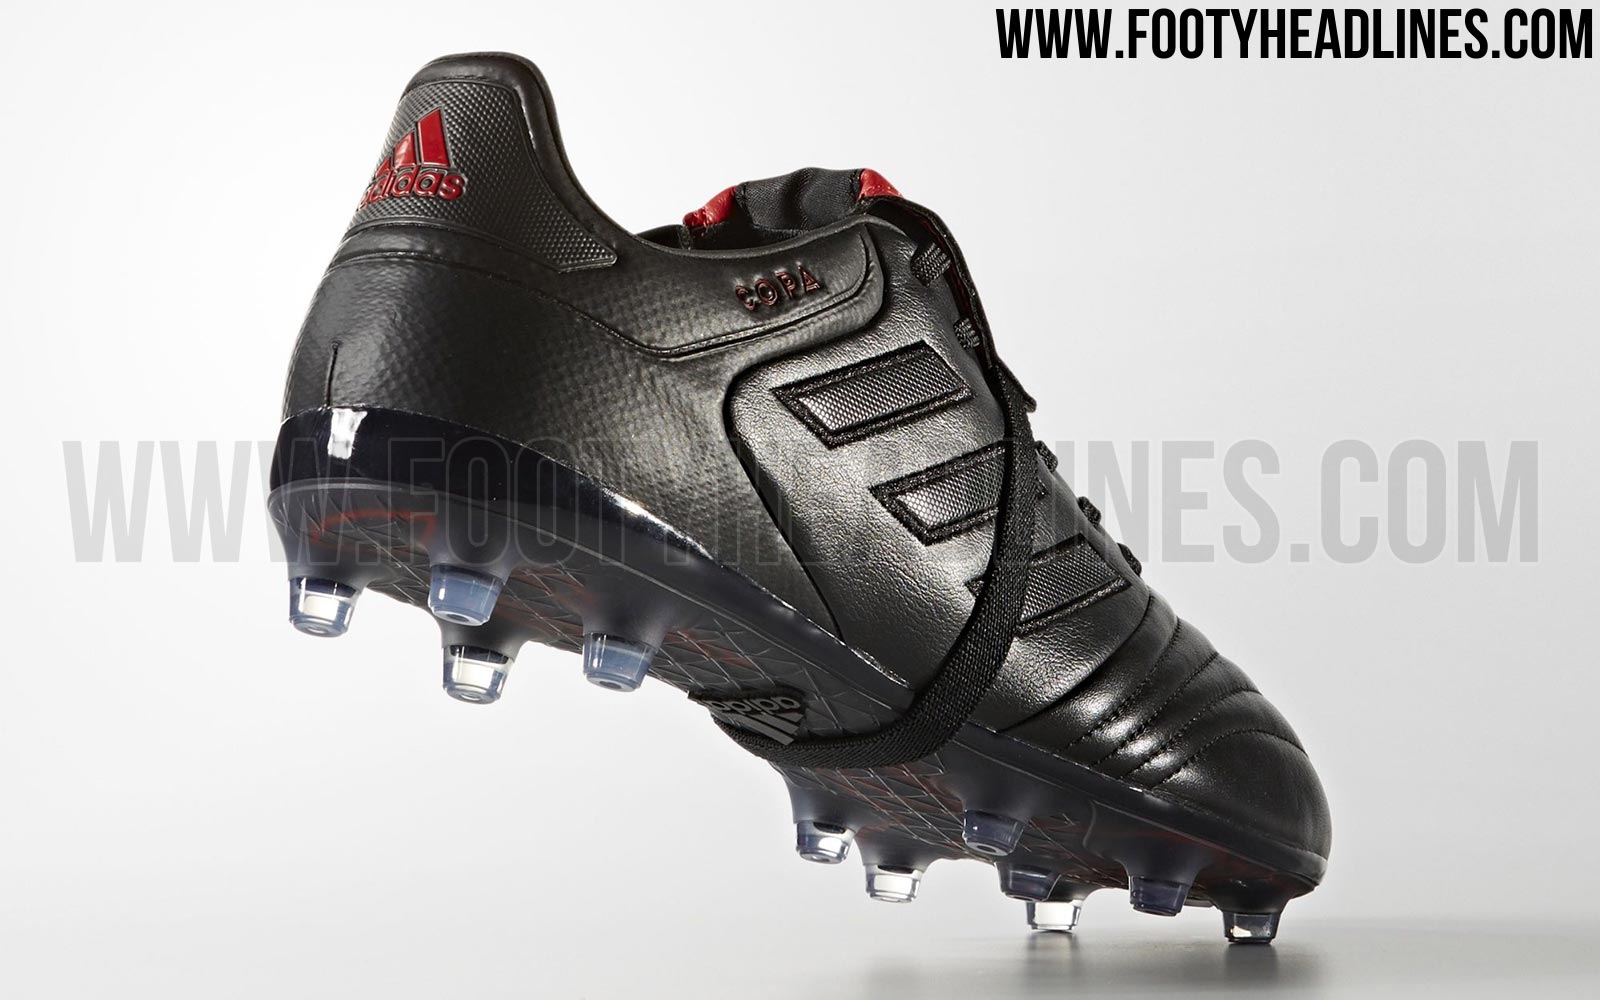 Black / Red Adidas Copa 17 Boots Released - Footy Headlines